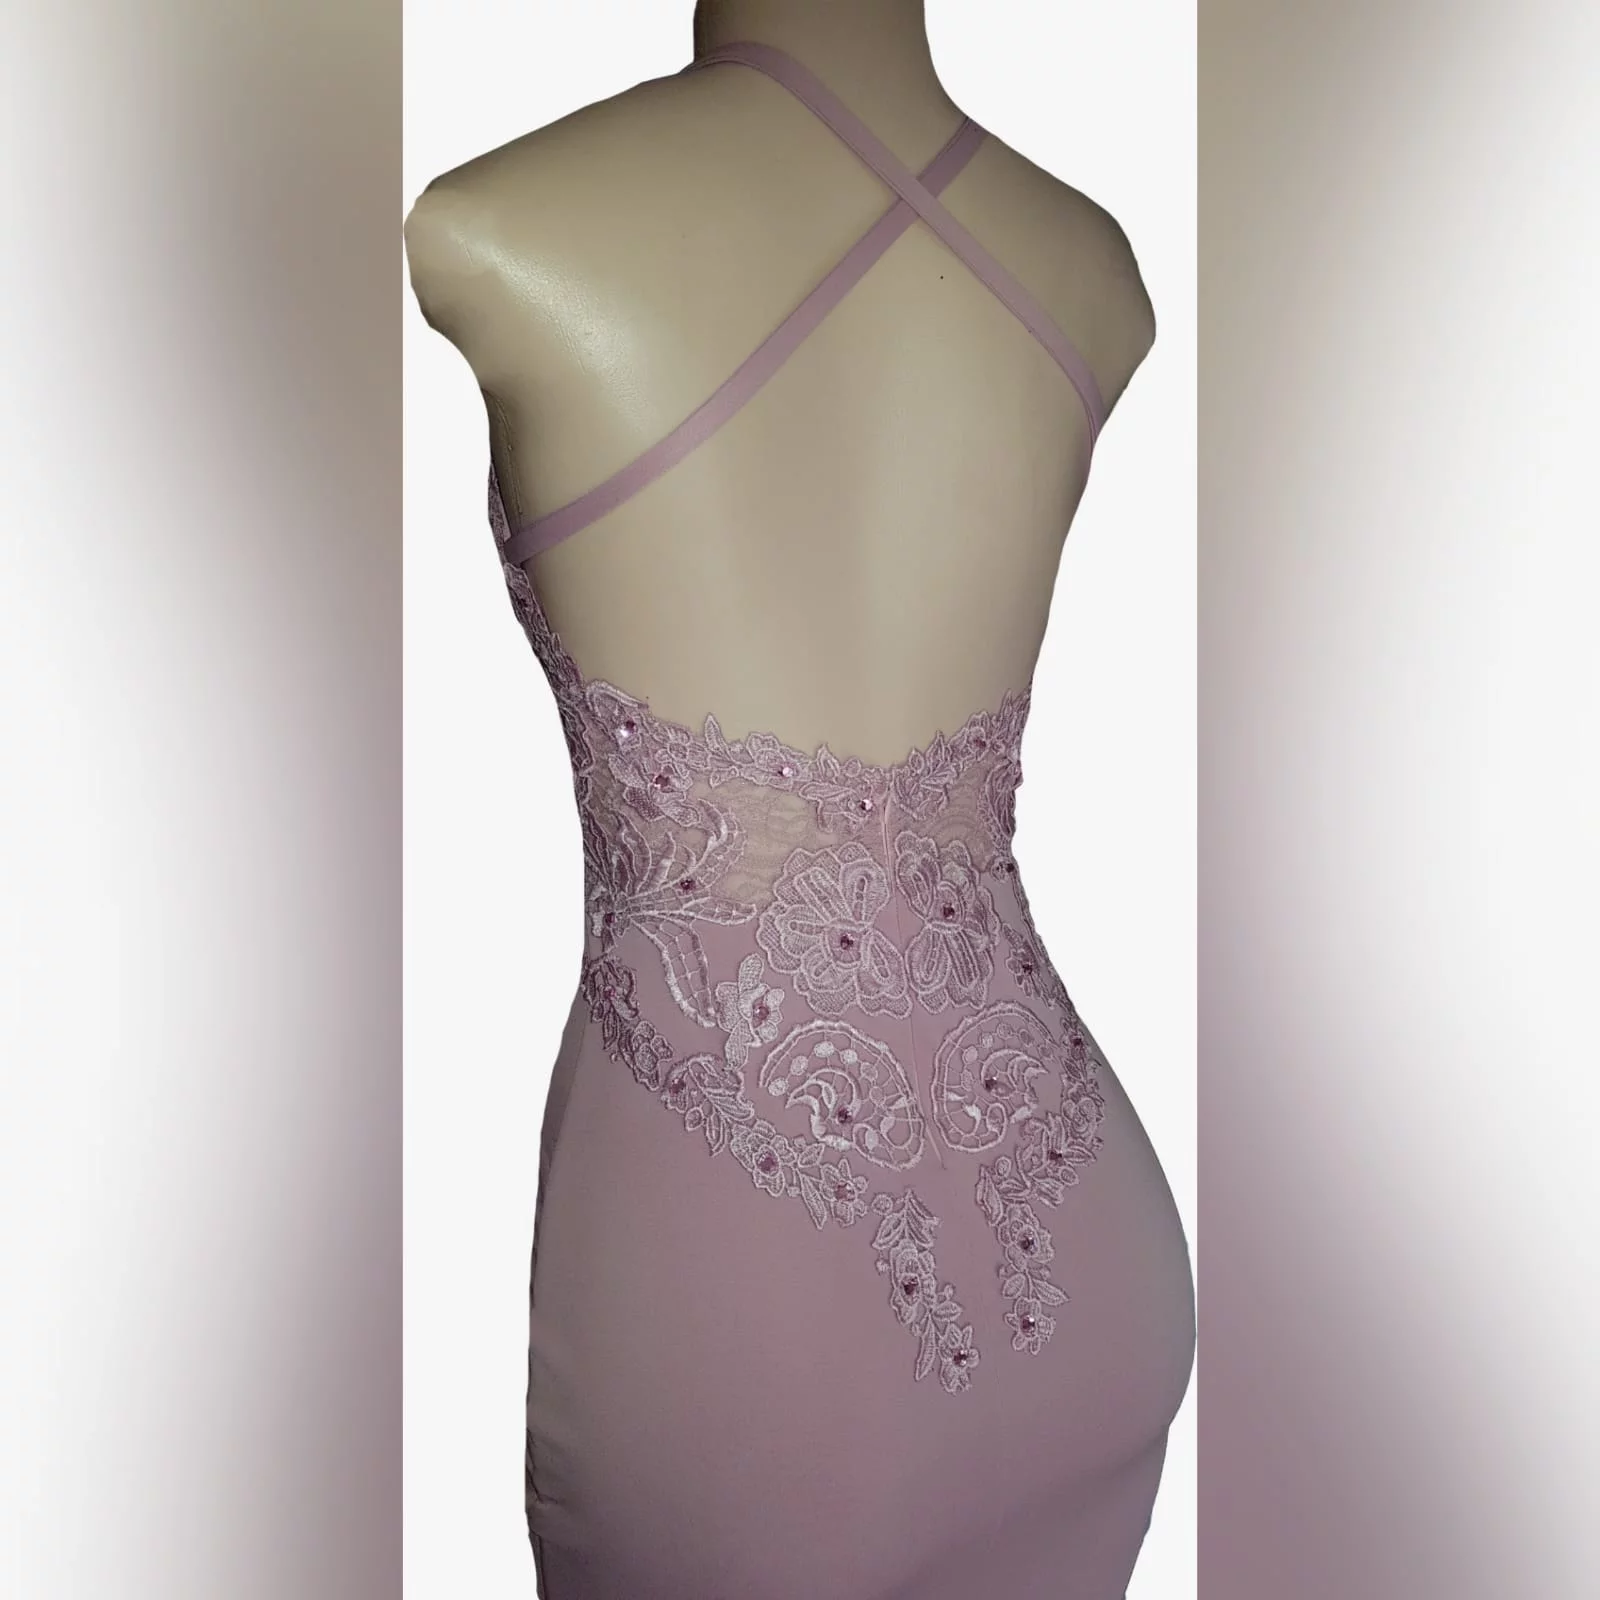 Pink sexy soft mermaid matric dance dress 7 look ravishing on your prom night with this pink sexy soft mermaid pink sexy soft mermaid matric dance dress. A fitted lace bodice with a plunging neckline, low back and a train to add some glamour to your important event.